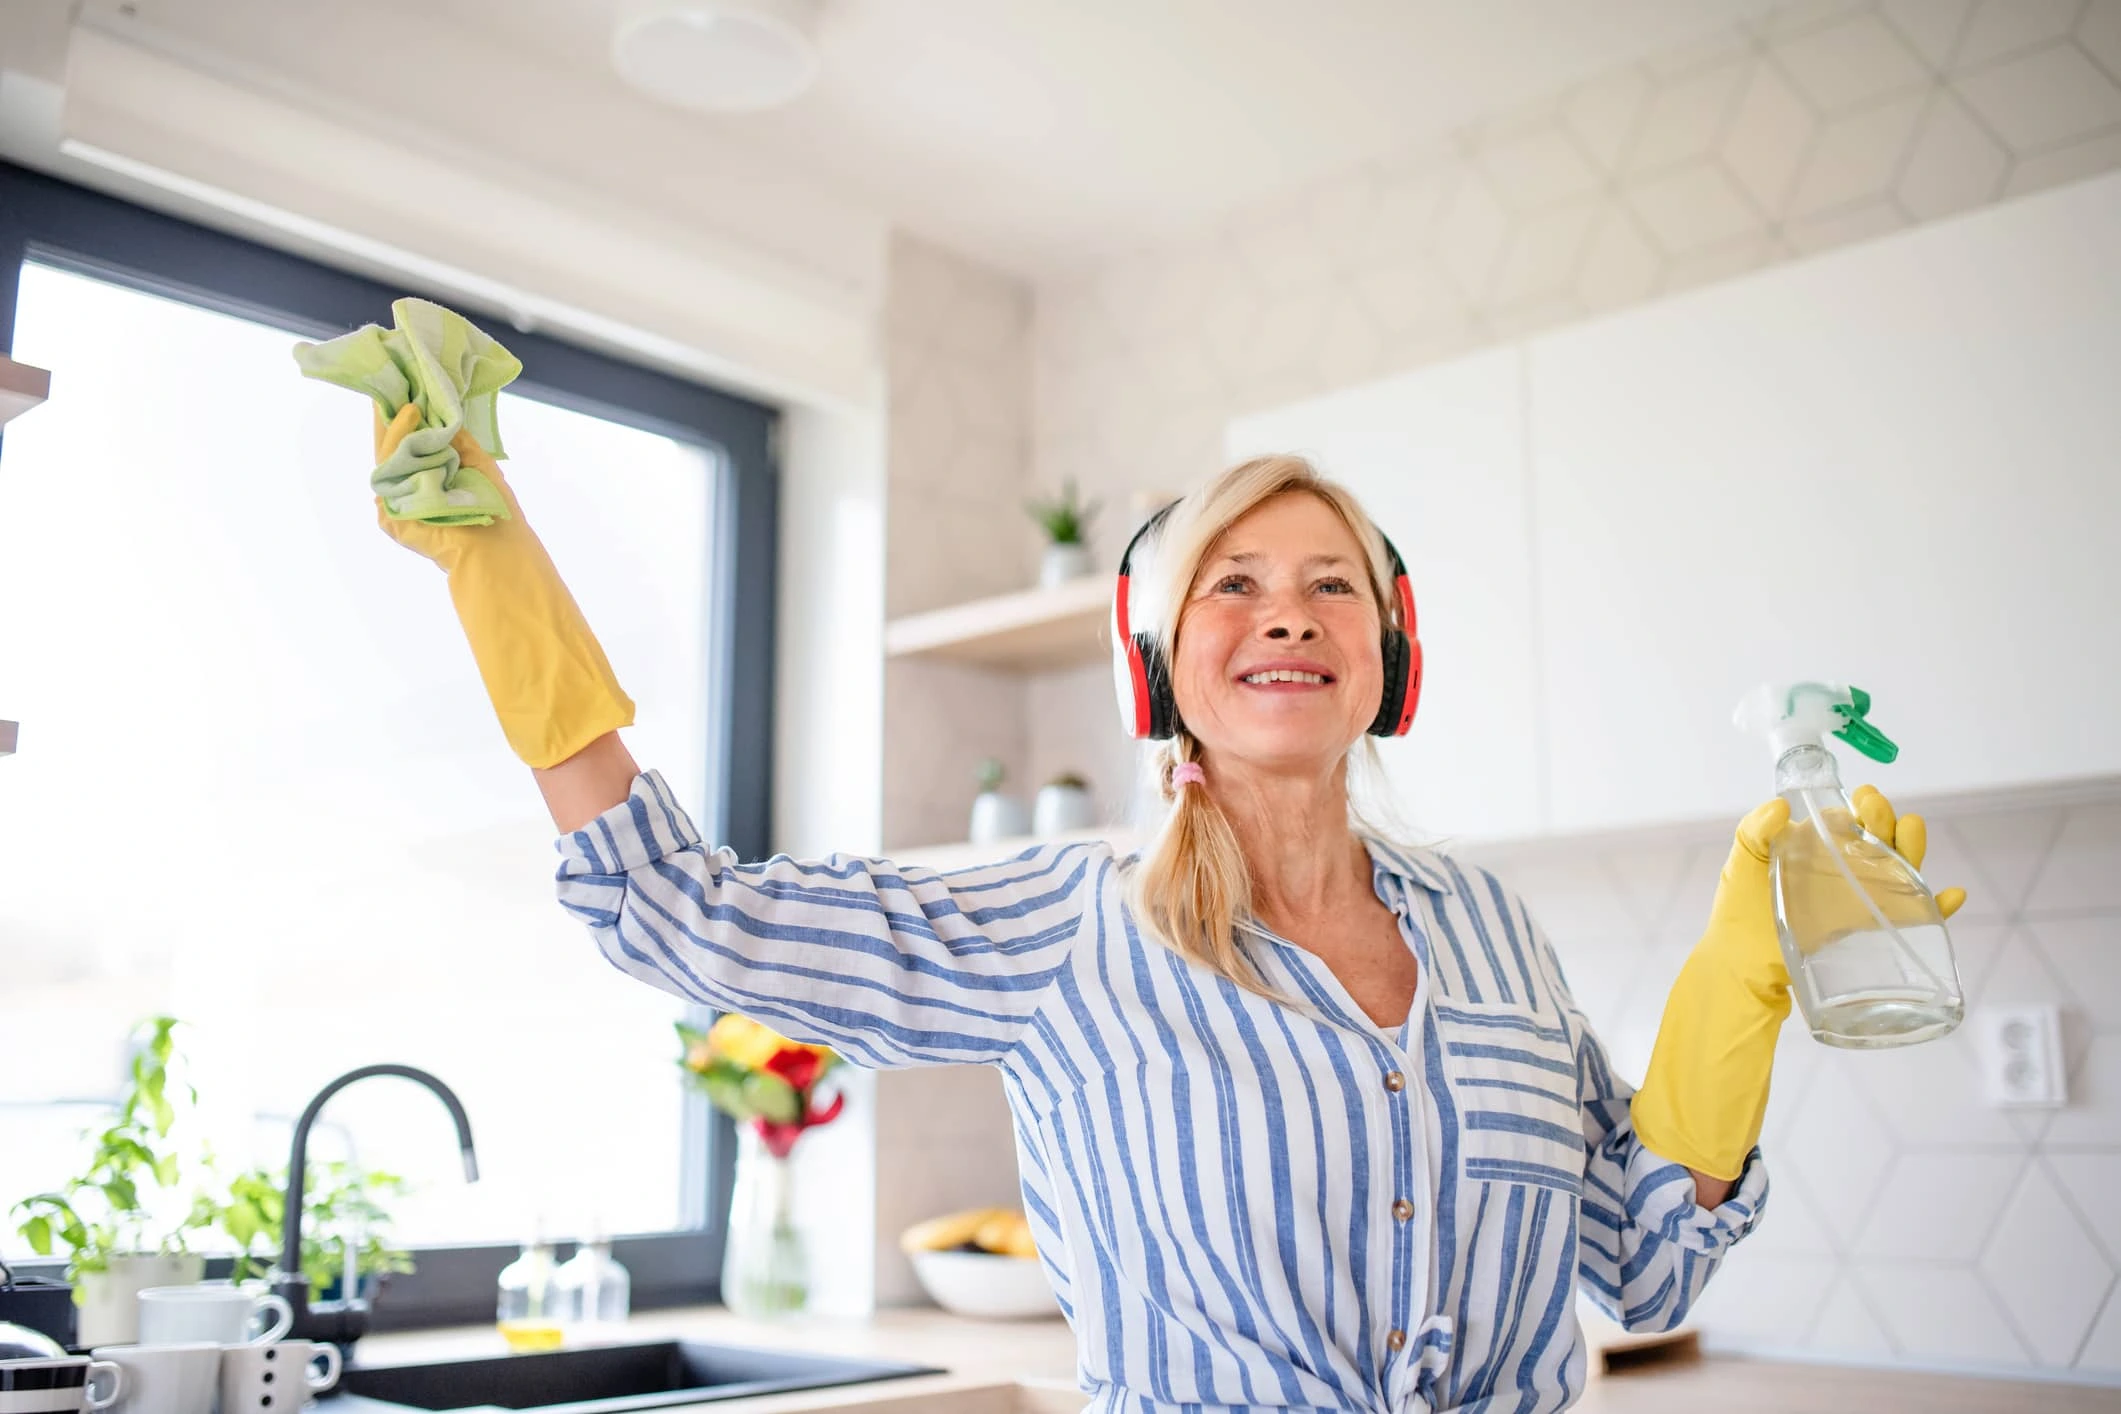 Happy woman does spring cleaning while listening to music